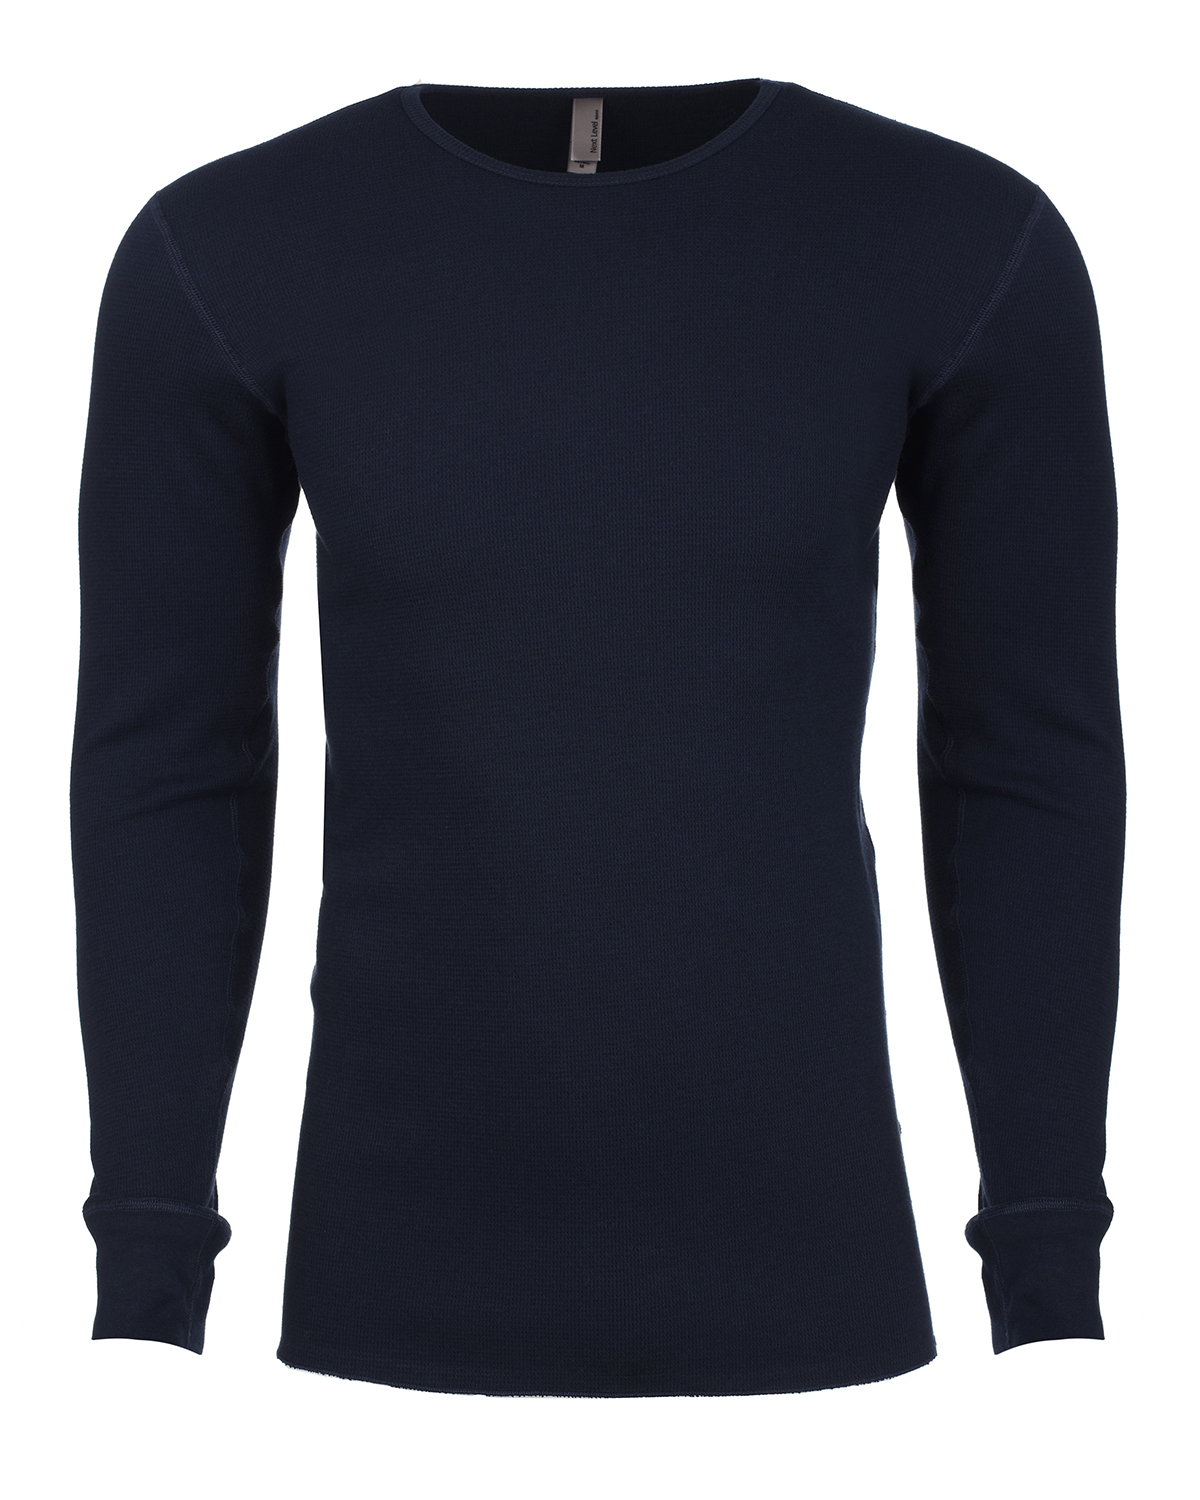 Next Level Apparel 8201 - Unisex Long Sleeve Thermal $9.24